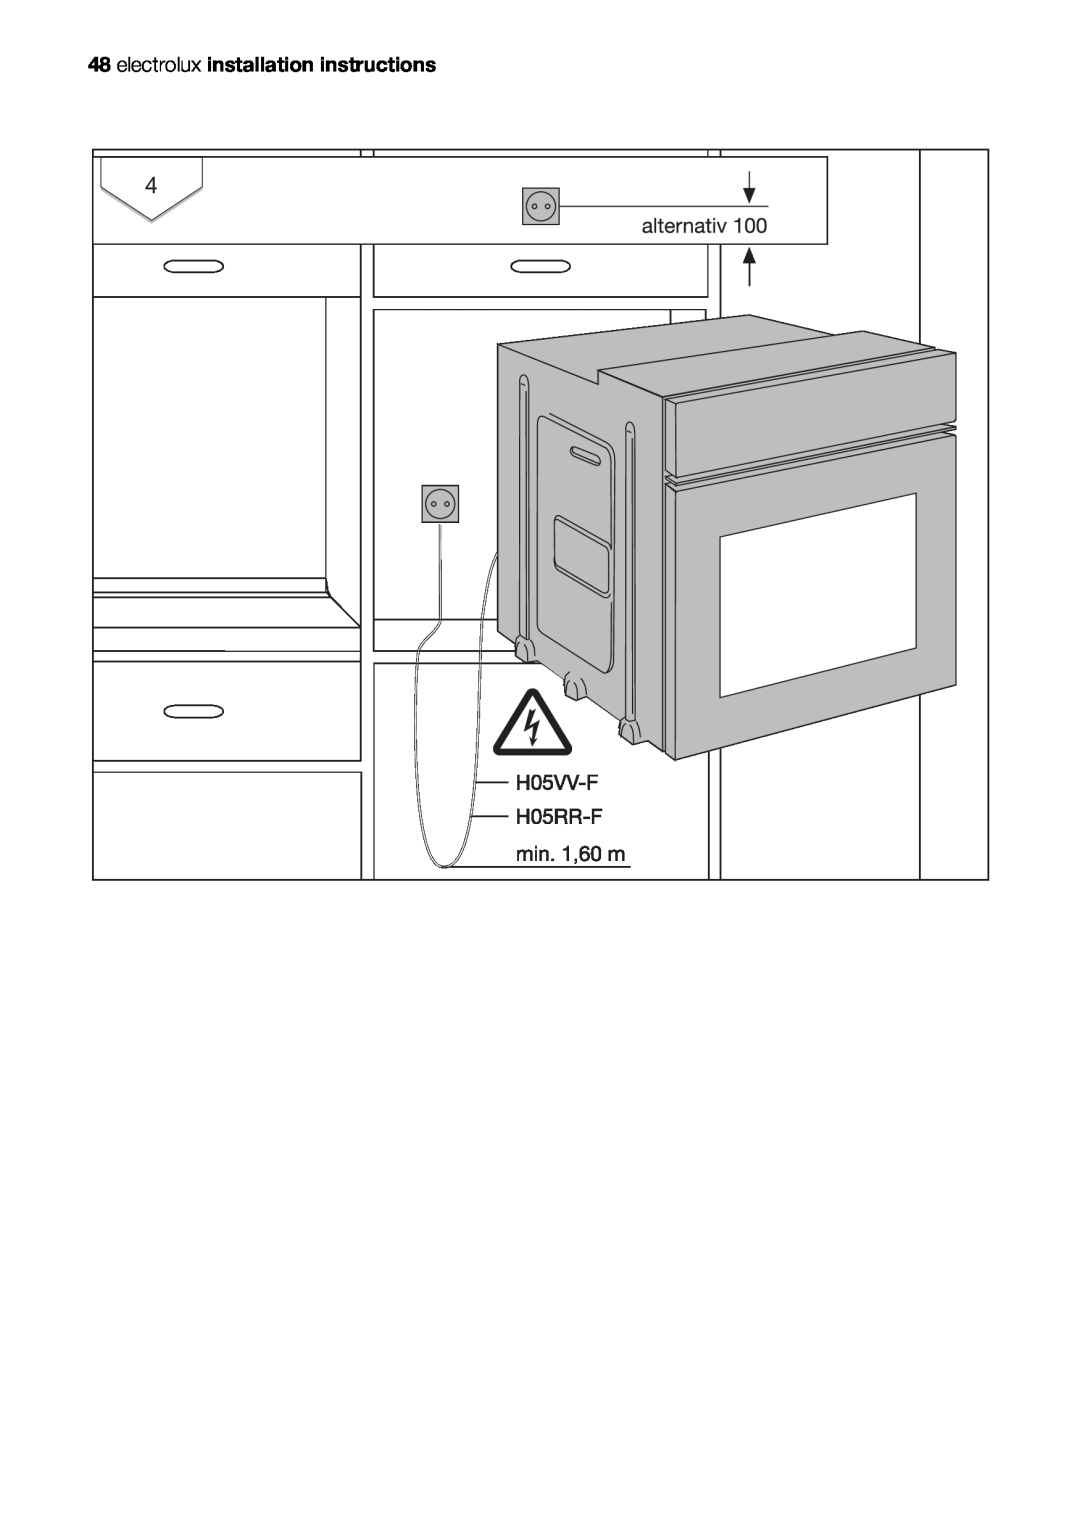 Electrolux EOB51000 user manual electrolux installation instructions 